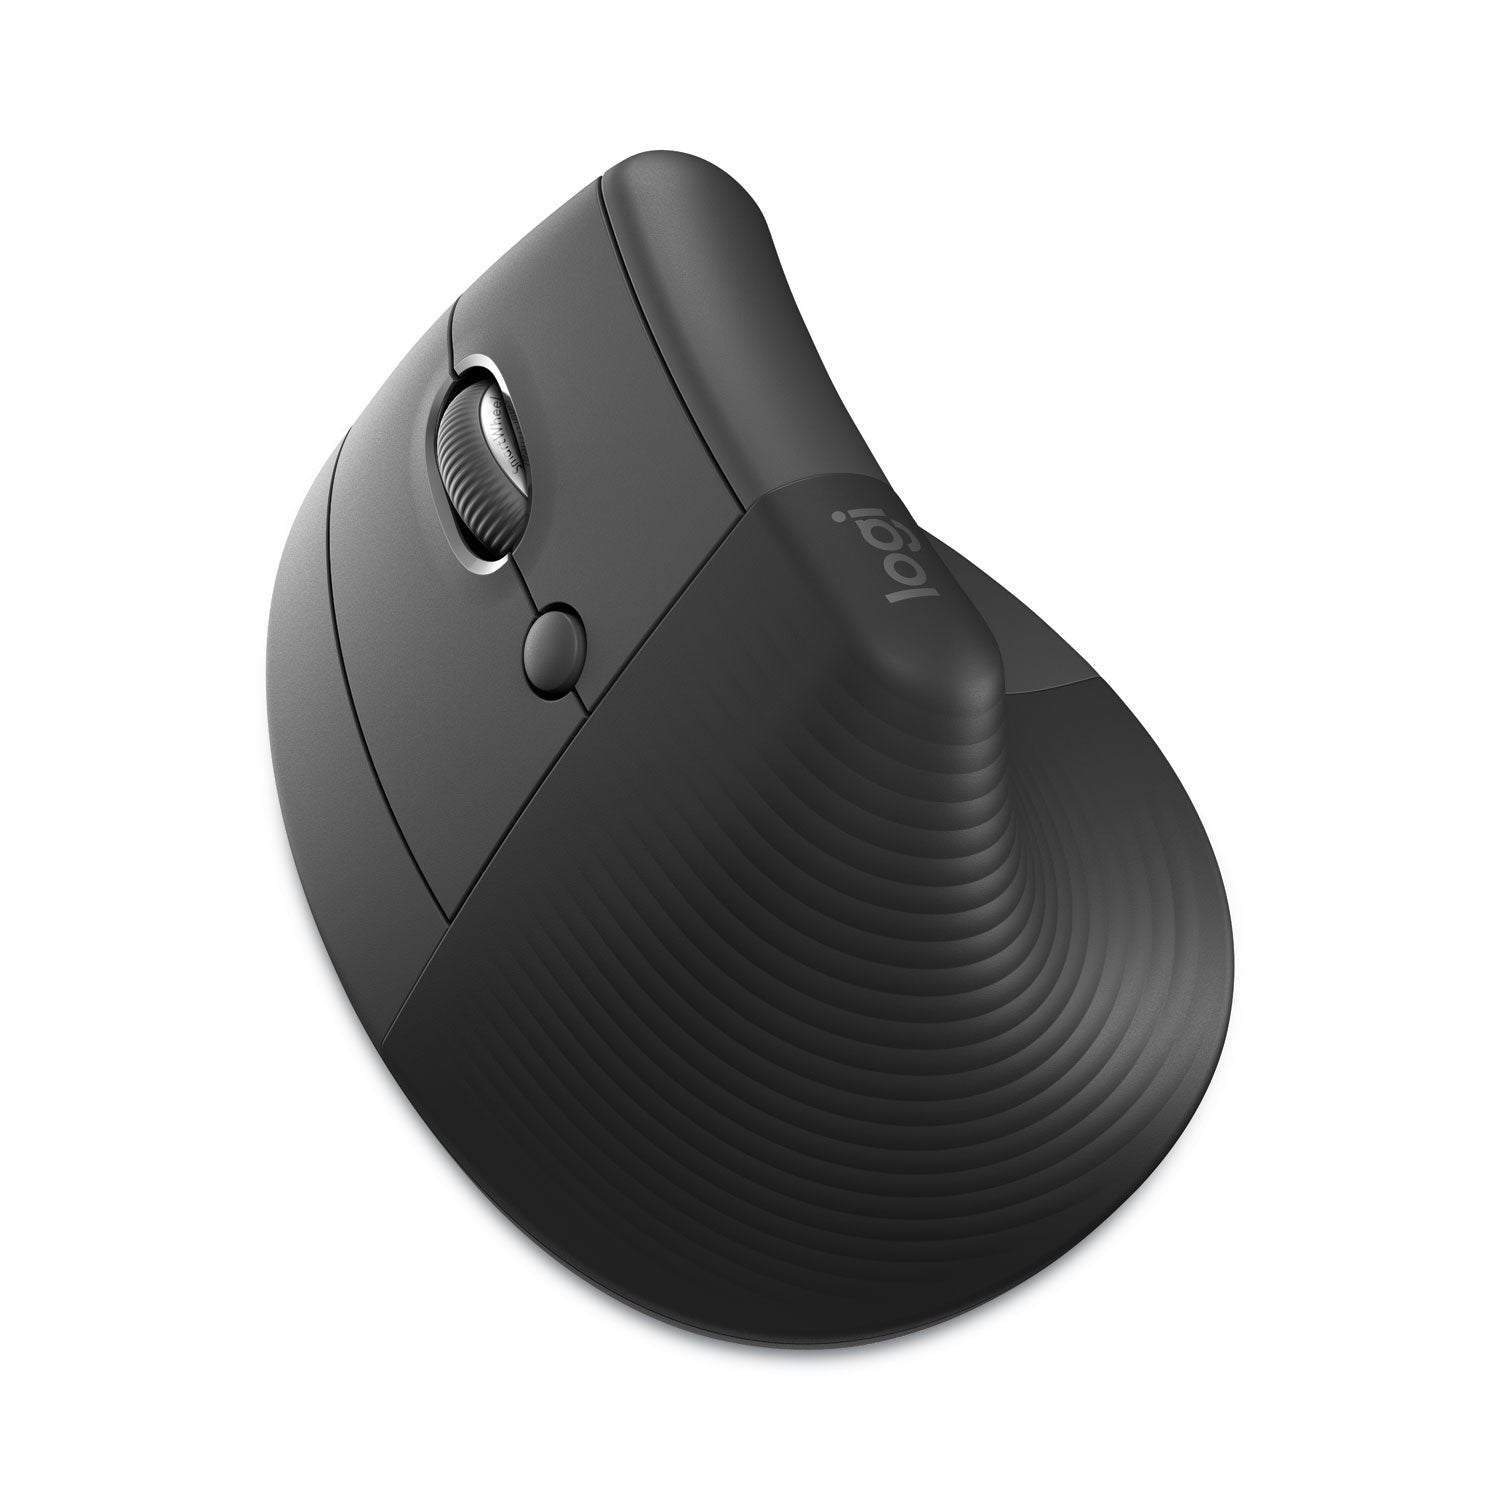 lift-vertical-ergonomic-mouse-24-ghz-frequency-32-ft-wireless-range-left-hand-use-graphite_log910006467 - 6